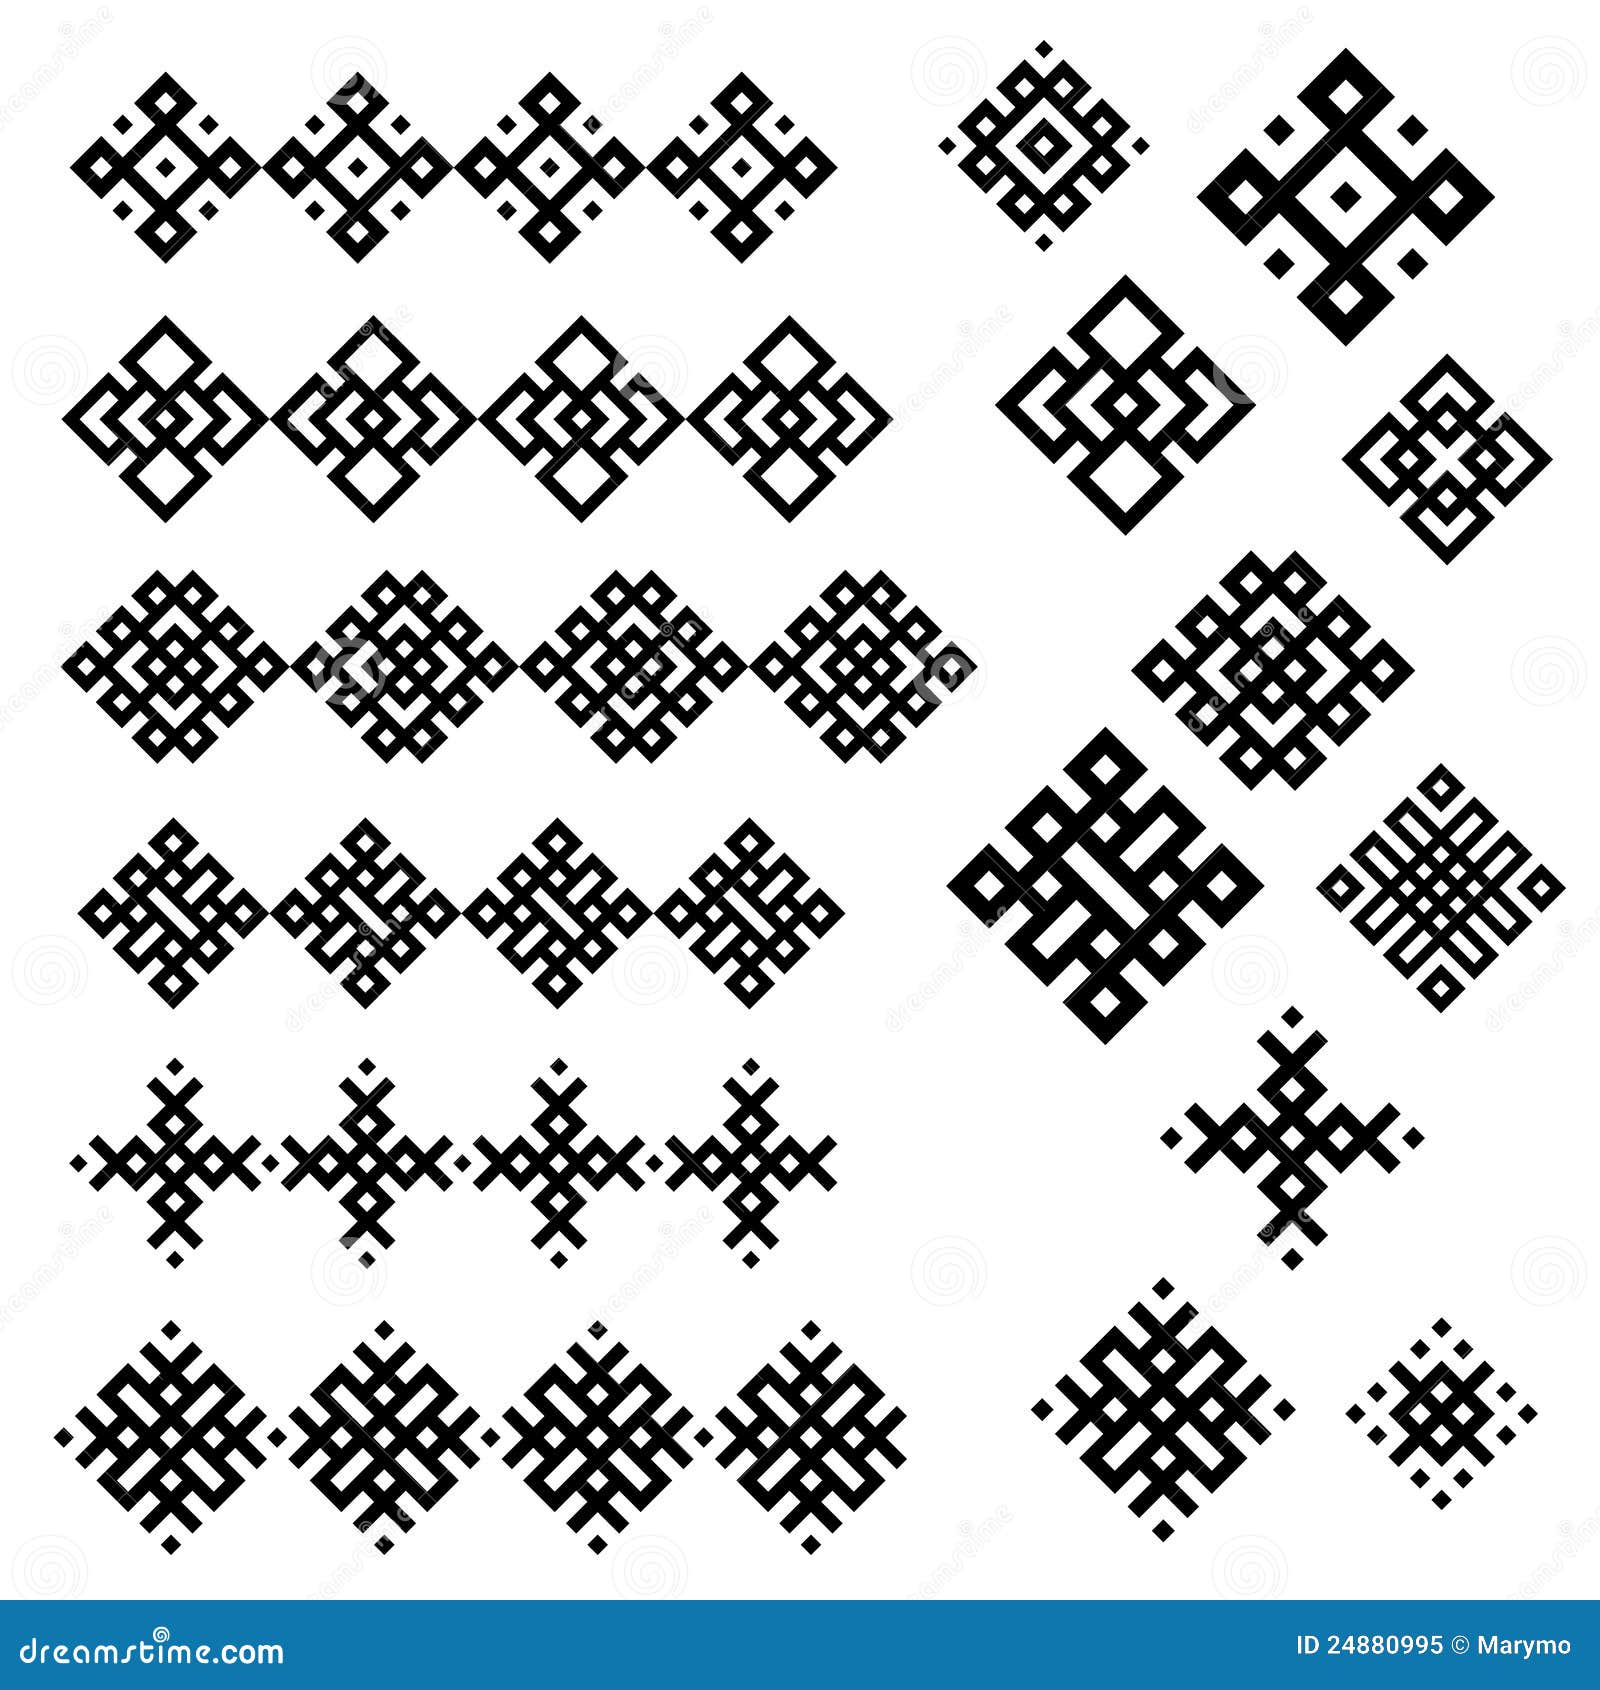 A Set Of Of Black And White Geometric Designs. Royalty Free Stock Photo ...